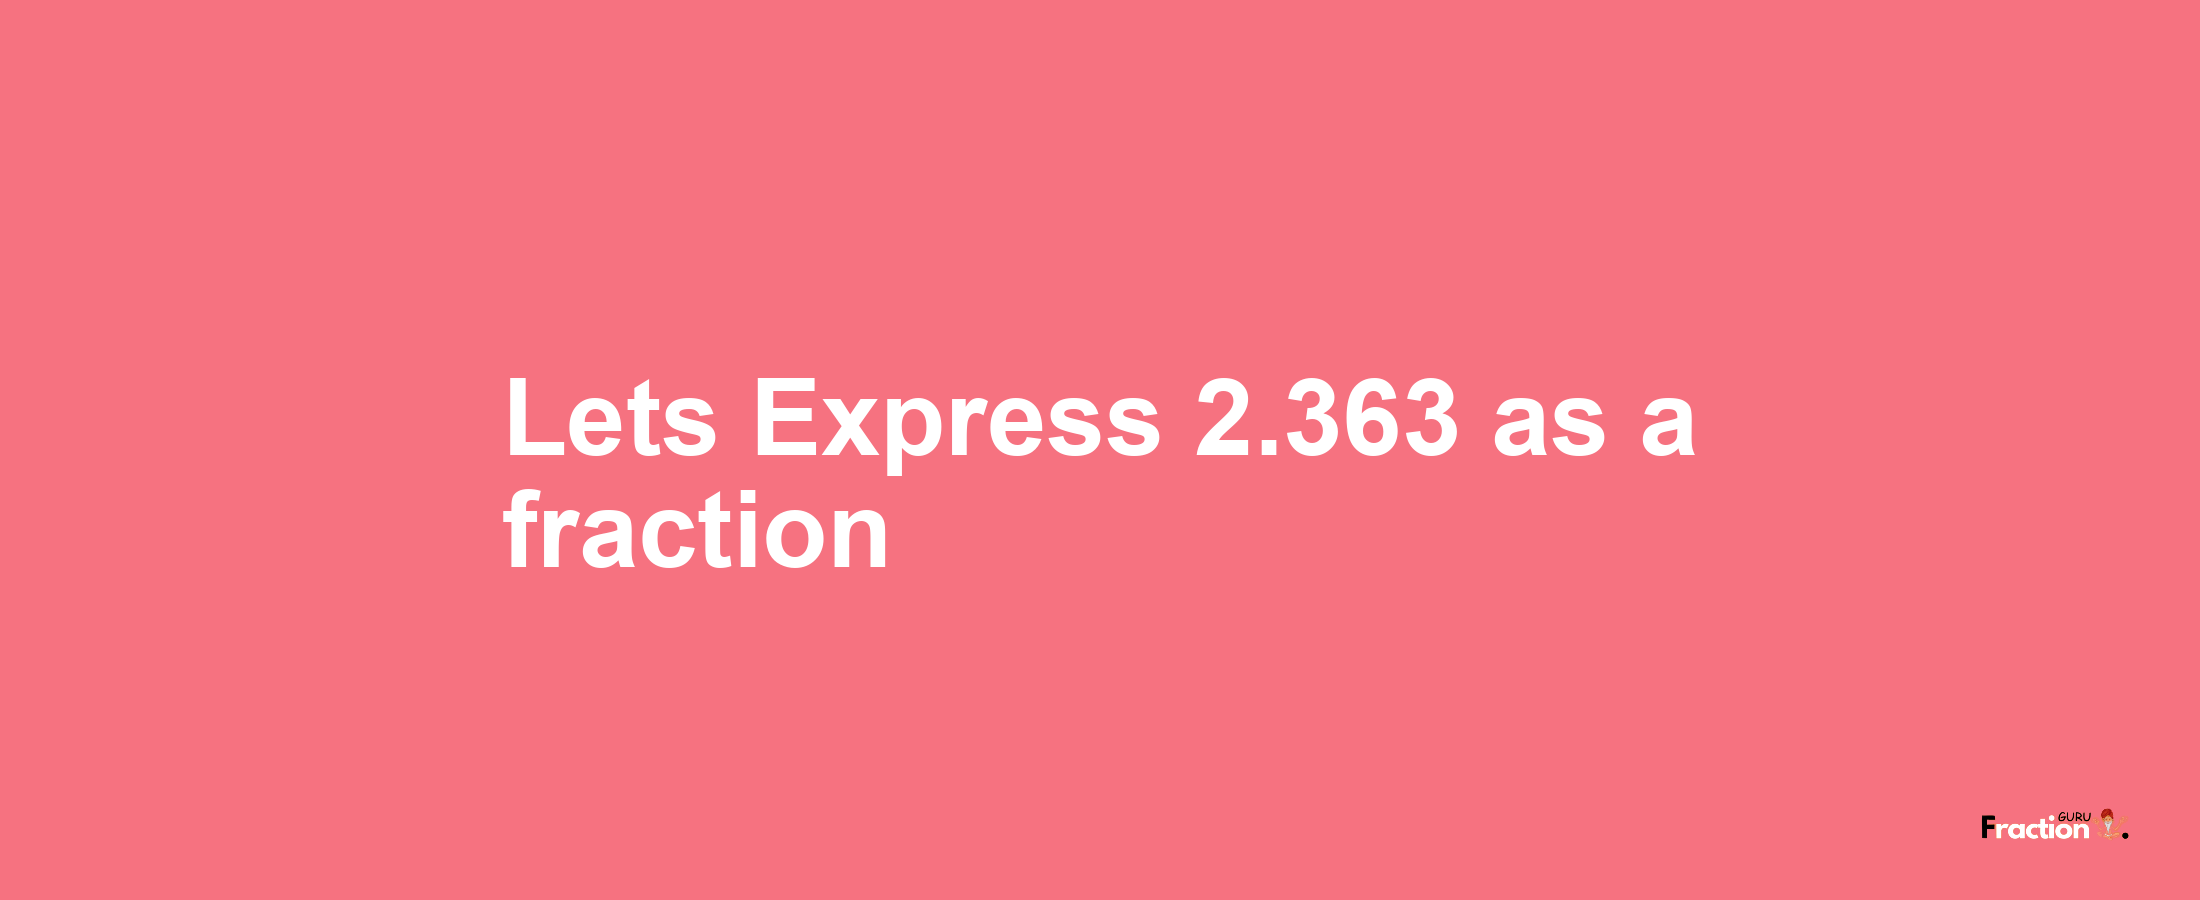 Lets Express 2.363 as afraction